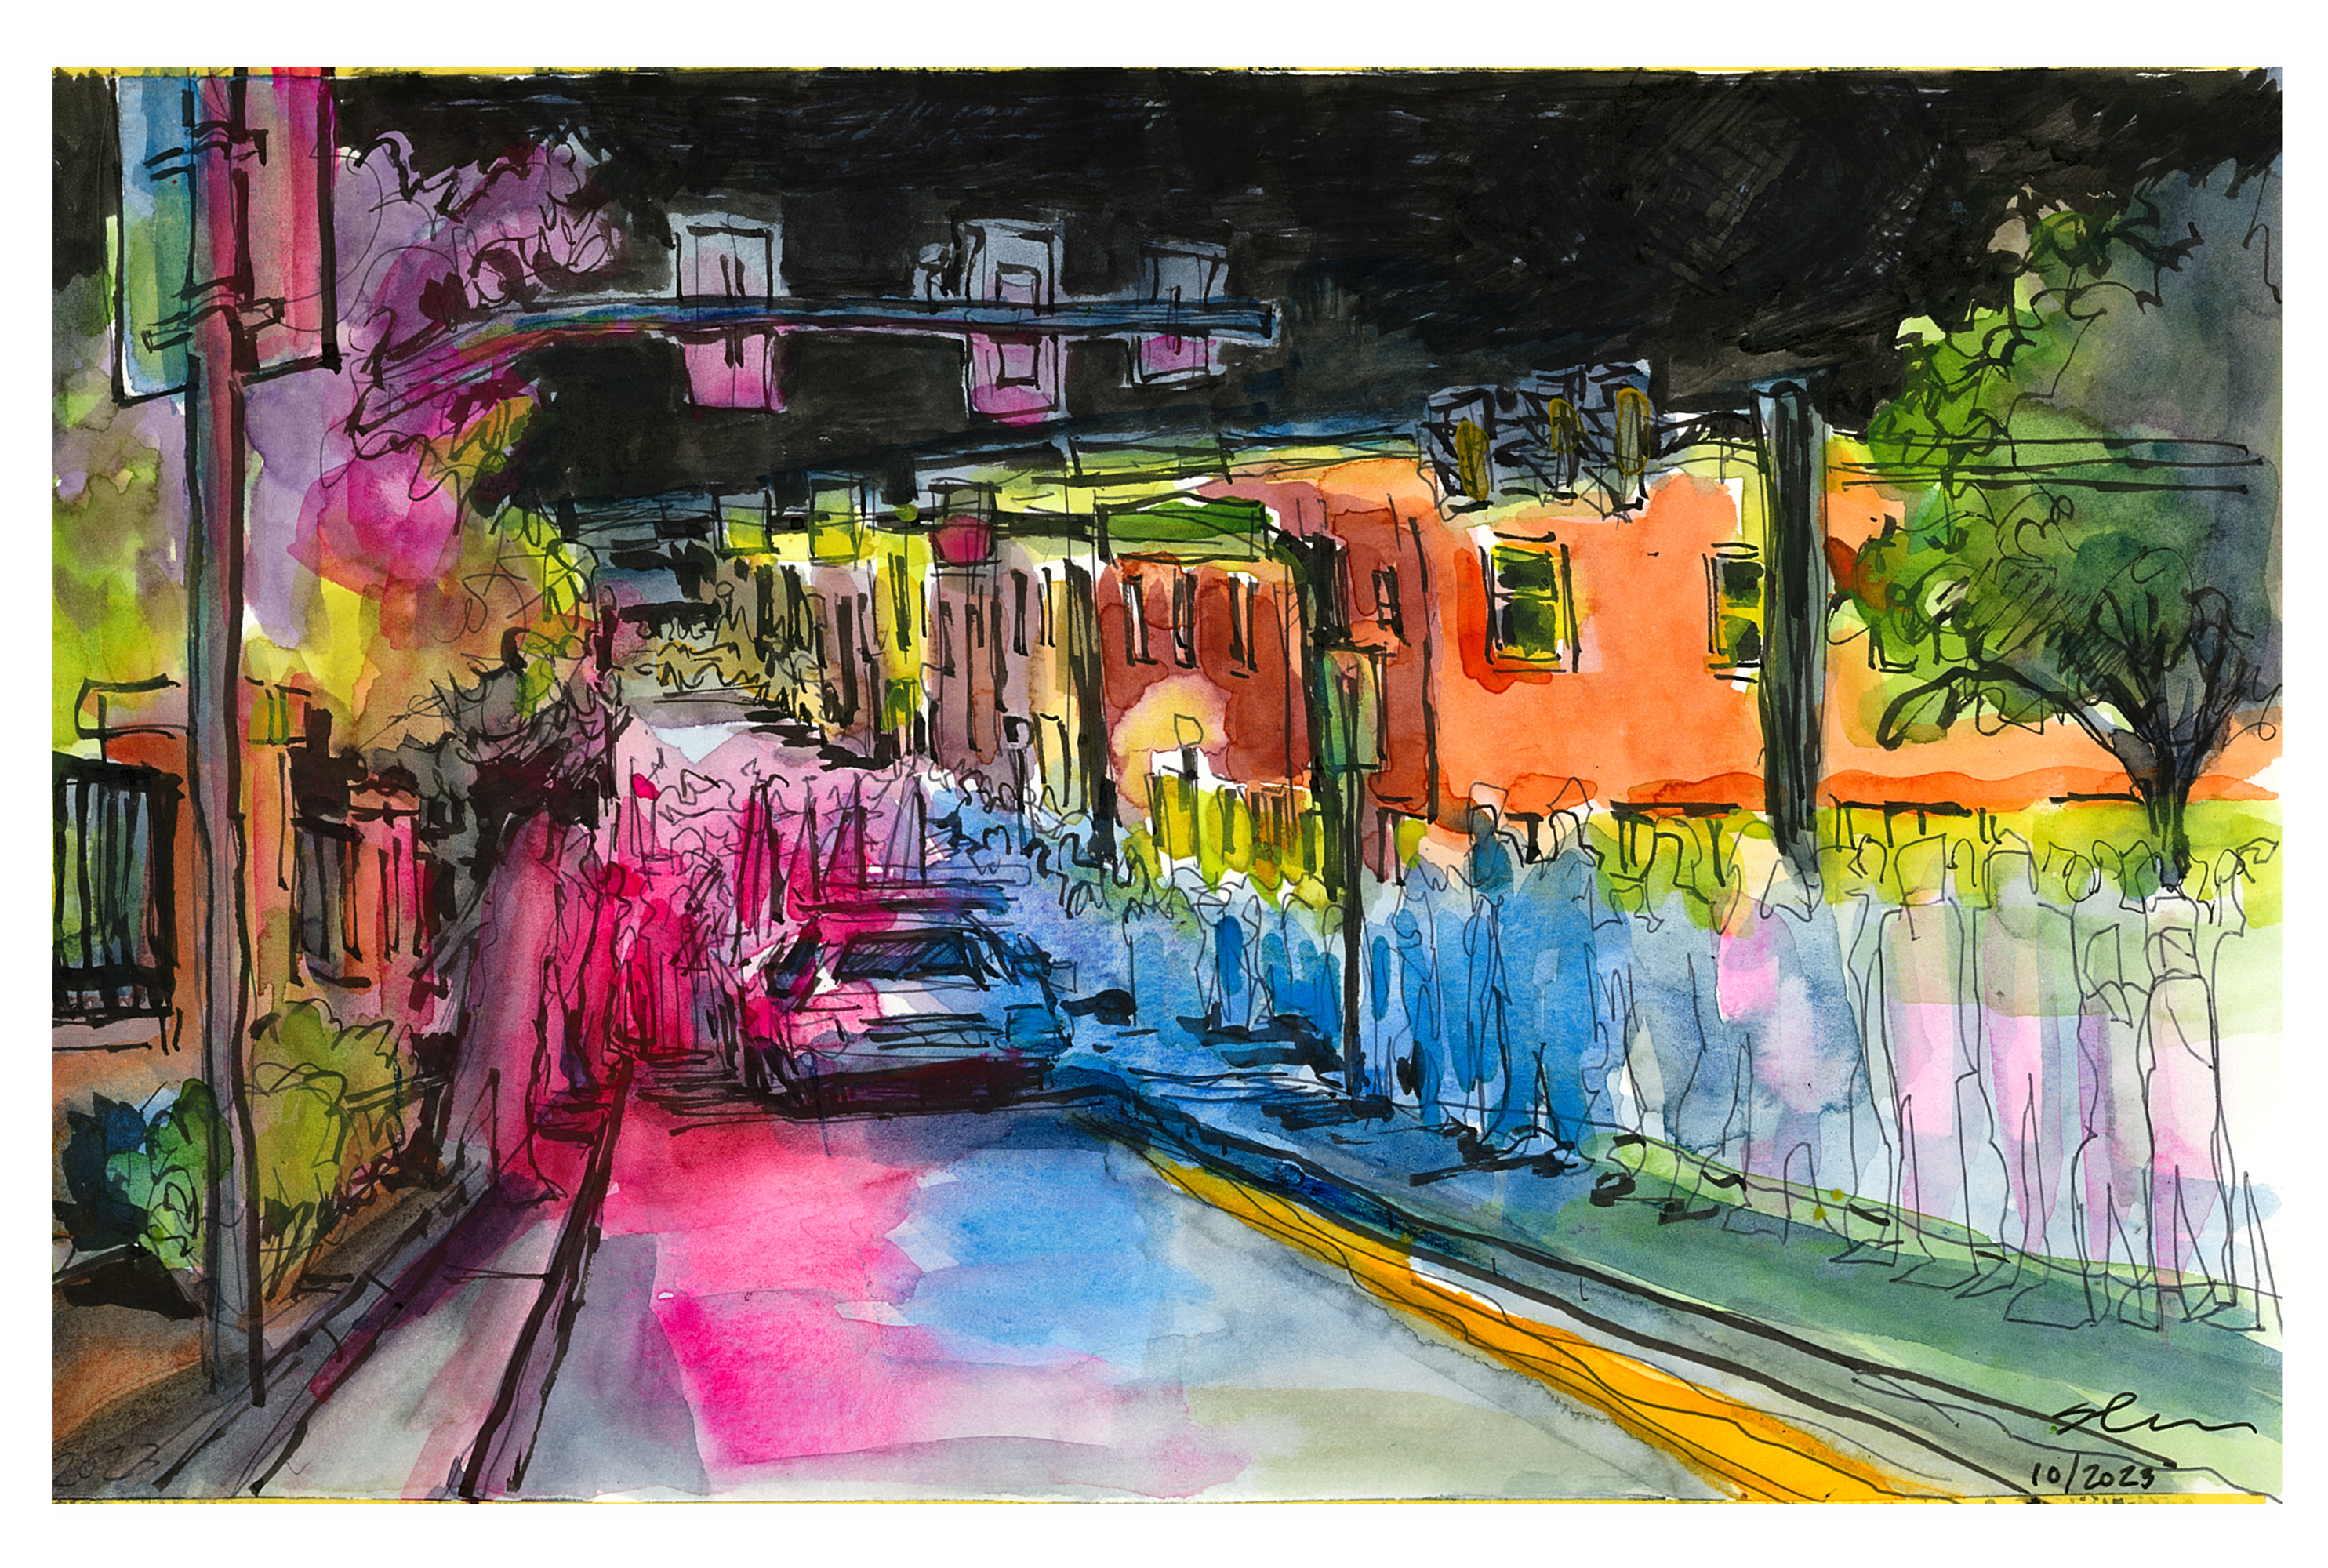 Ink and watercolor sketch of the 2023 Homecomiing Parade on Main Street, Blacksburg